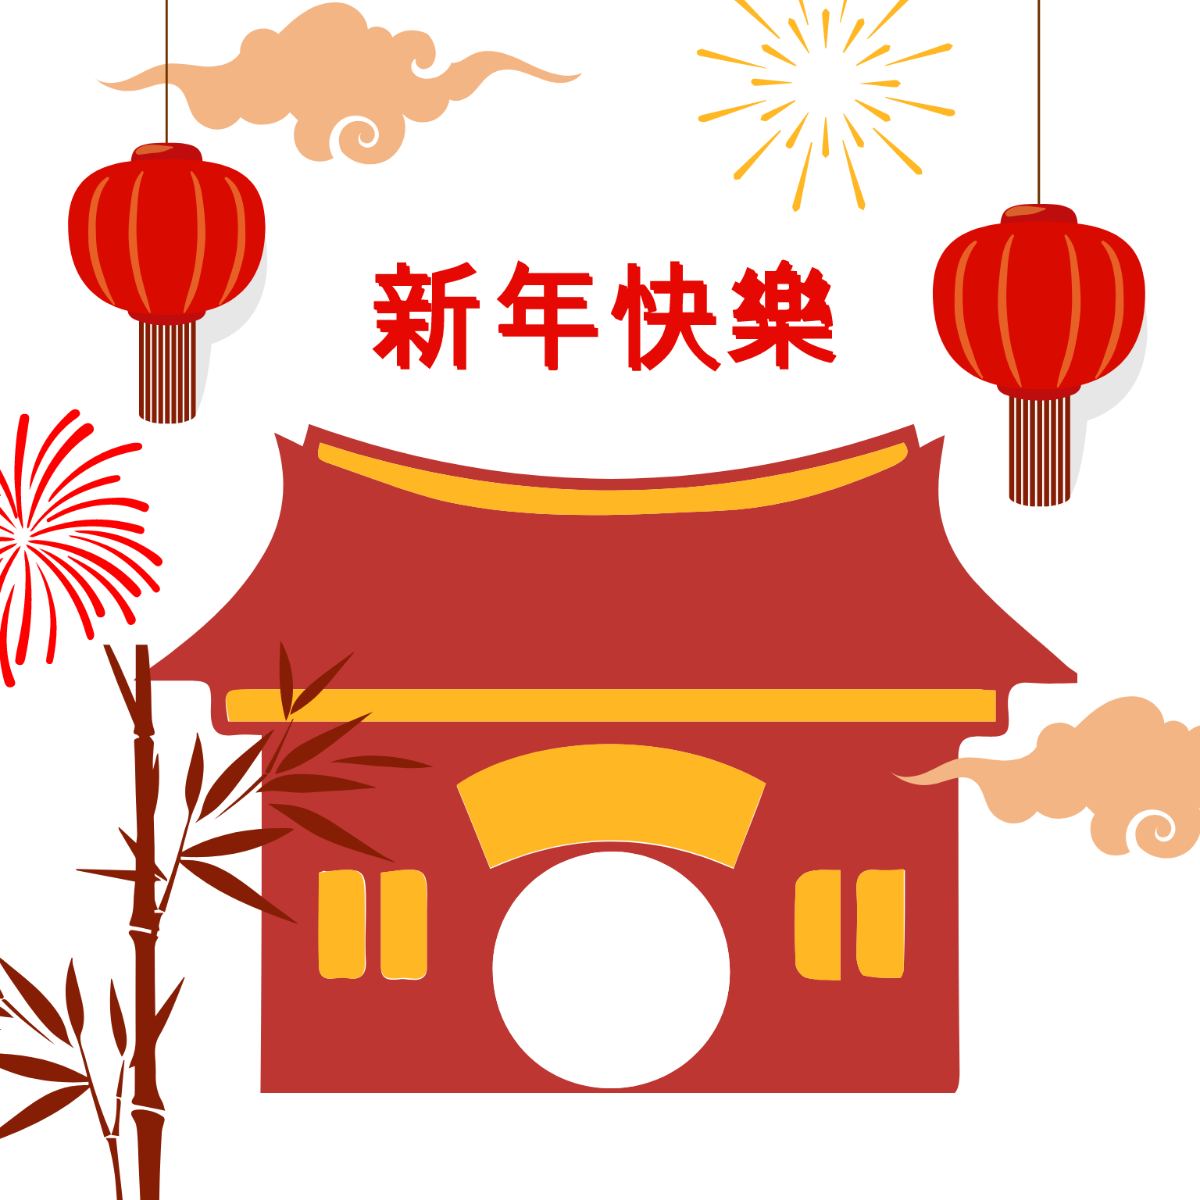 Chinese New Year Illustrator Template